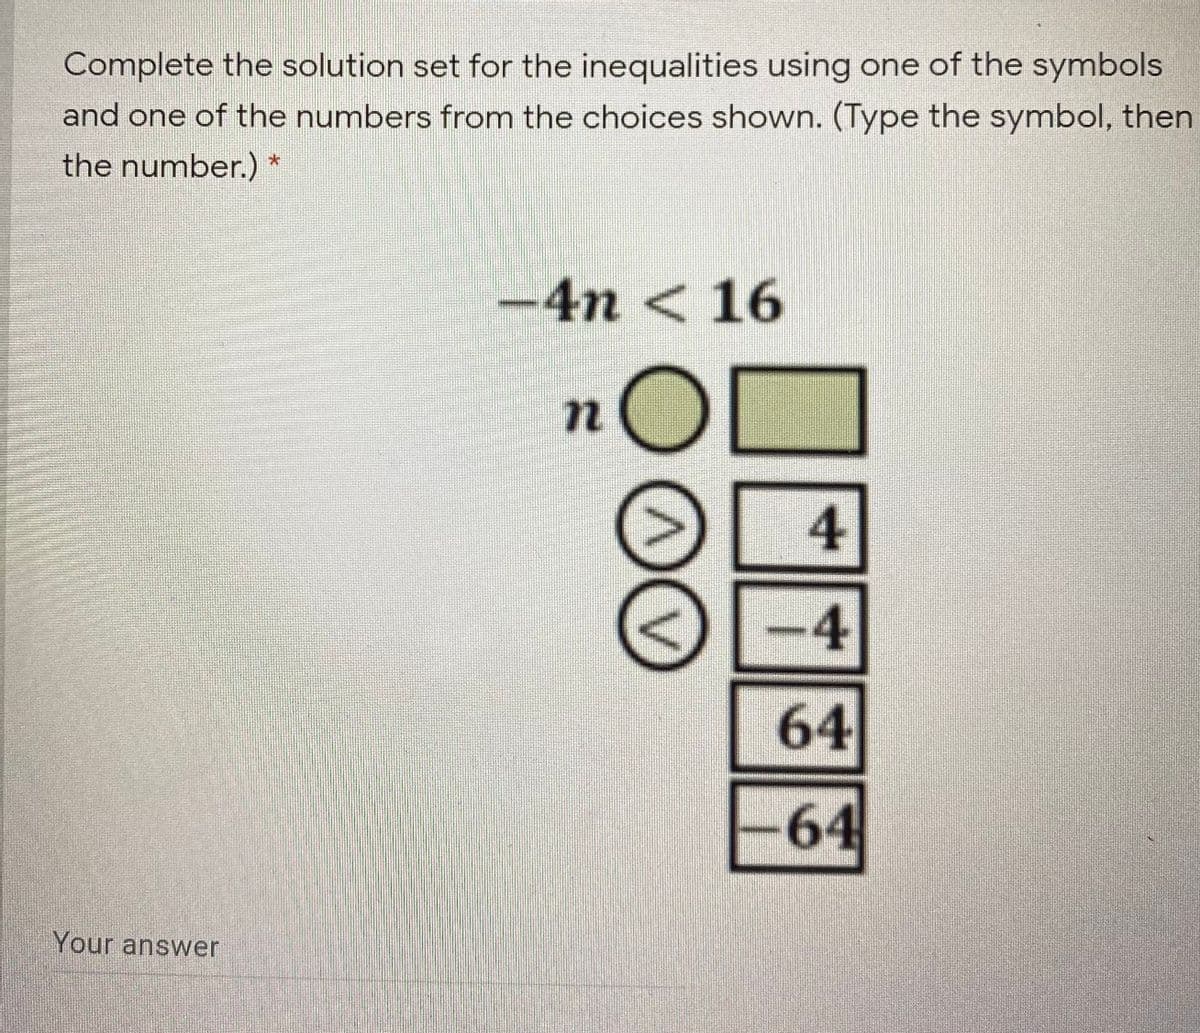 Complete the solution set for the inequalities using one of the symbols
and one of the numbers from the choices shown. (Type the symbol, then
the number.)
-4n < 16
4
-4
64
-64
Your answer
